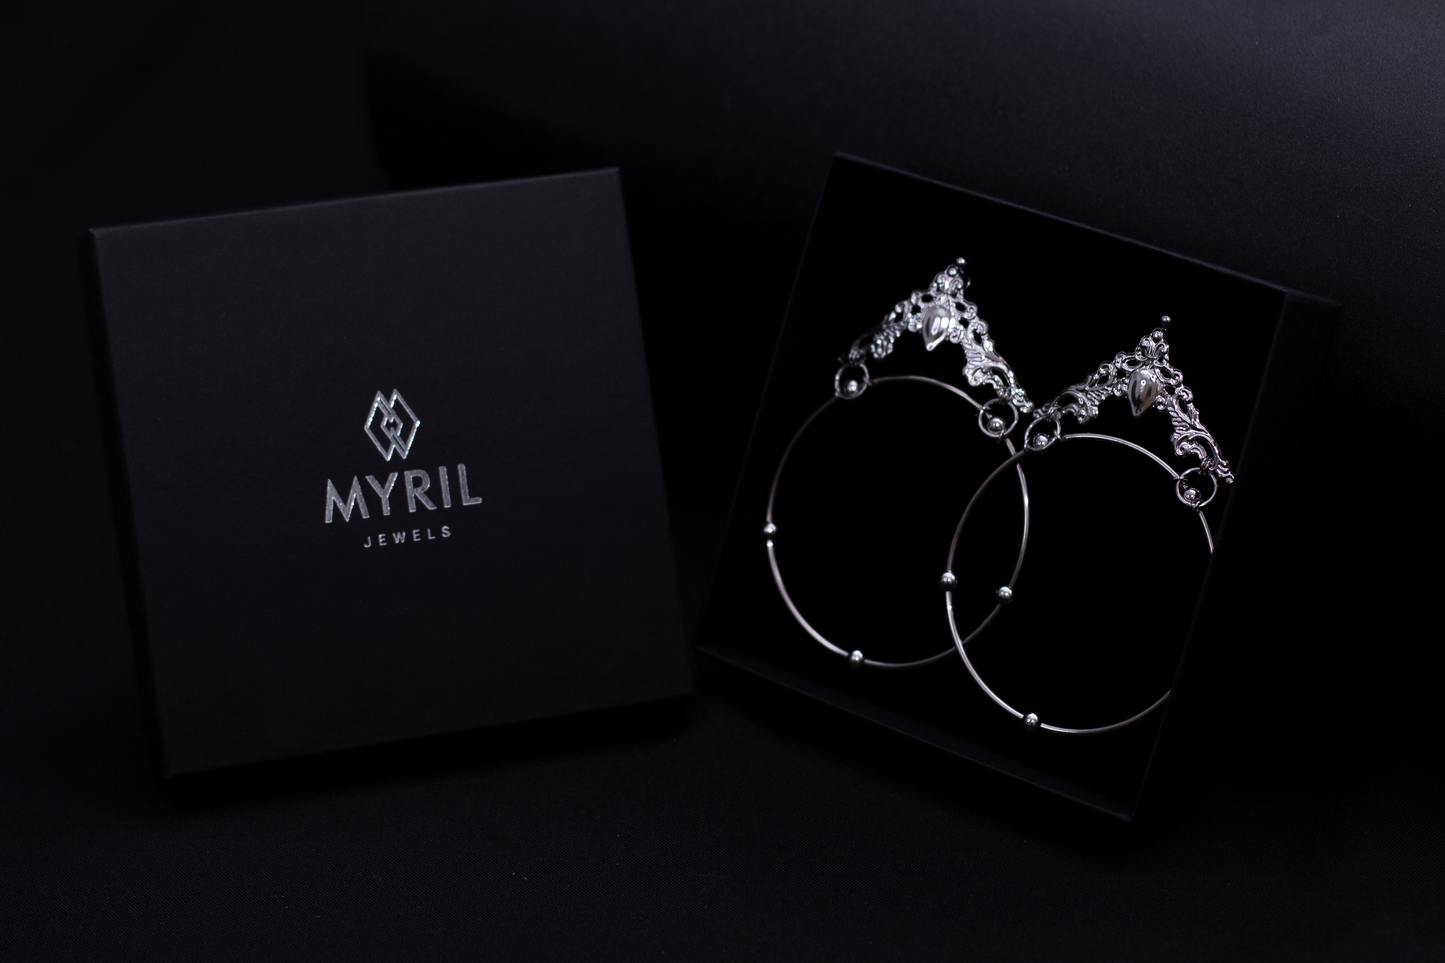 Elegant Myril Jewels gothic hoop earrings, presented in a sleek black box, exemplify neo-gothic charm. These bold, wide hoops are perfect for those embracing a dark-avantgarde aesthetic, making an ideal gift for the goth girlfriend or a unique friend gift idea